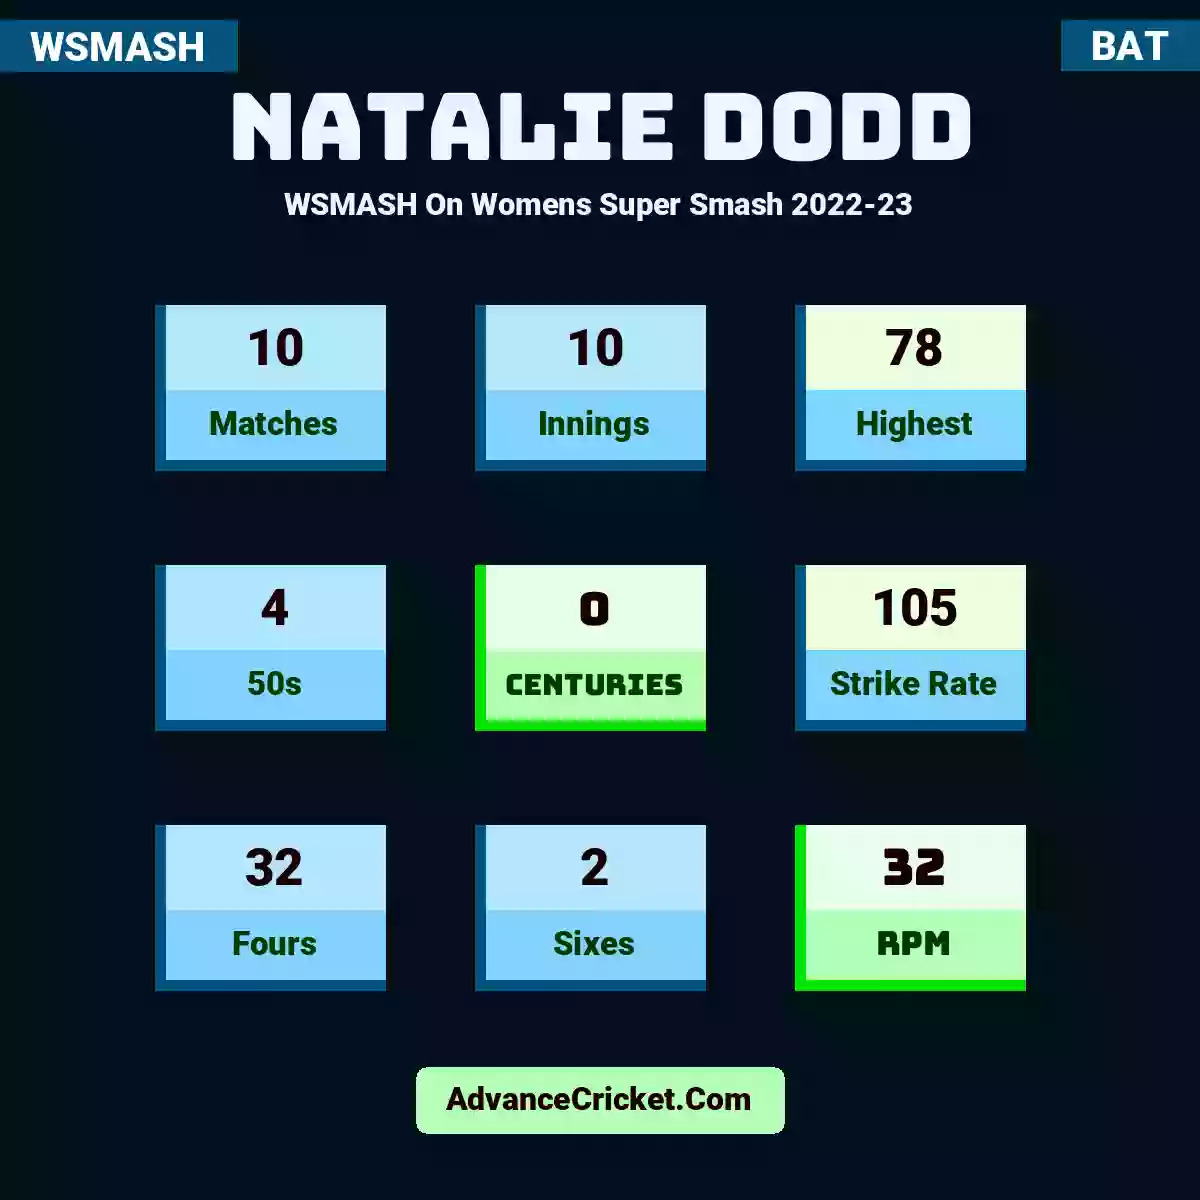 Natalie Dodd WSMASH  On Womens Super Smash 2022-23, Natalie Dodd played 10 matches, scored 78 runs as highest, 4 half-centuries, and 0 centuries, with a strike rate of 105. N.Dodd hit 32 fours and 2 sixes, with an RPM of 32.